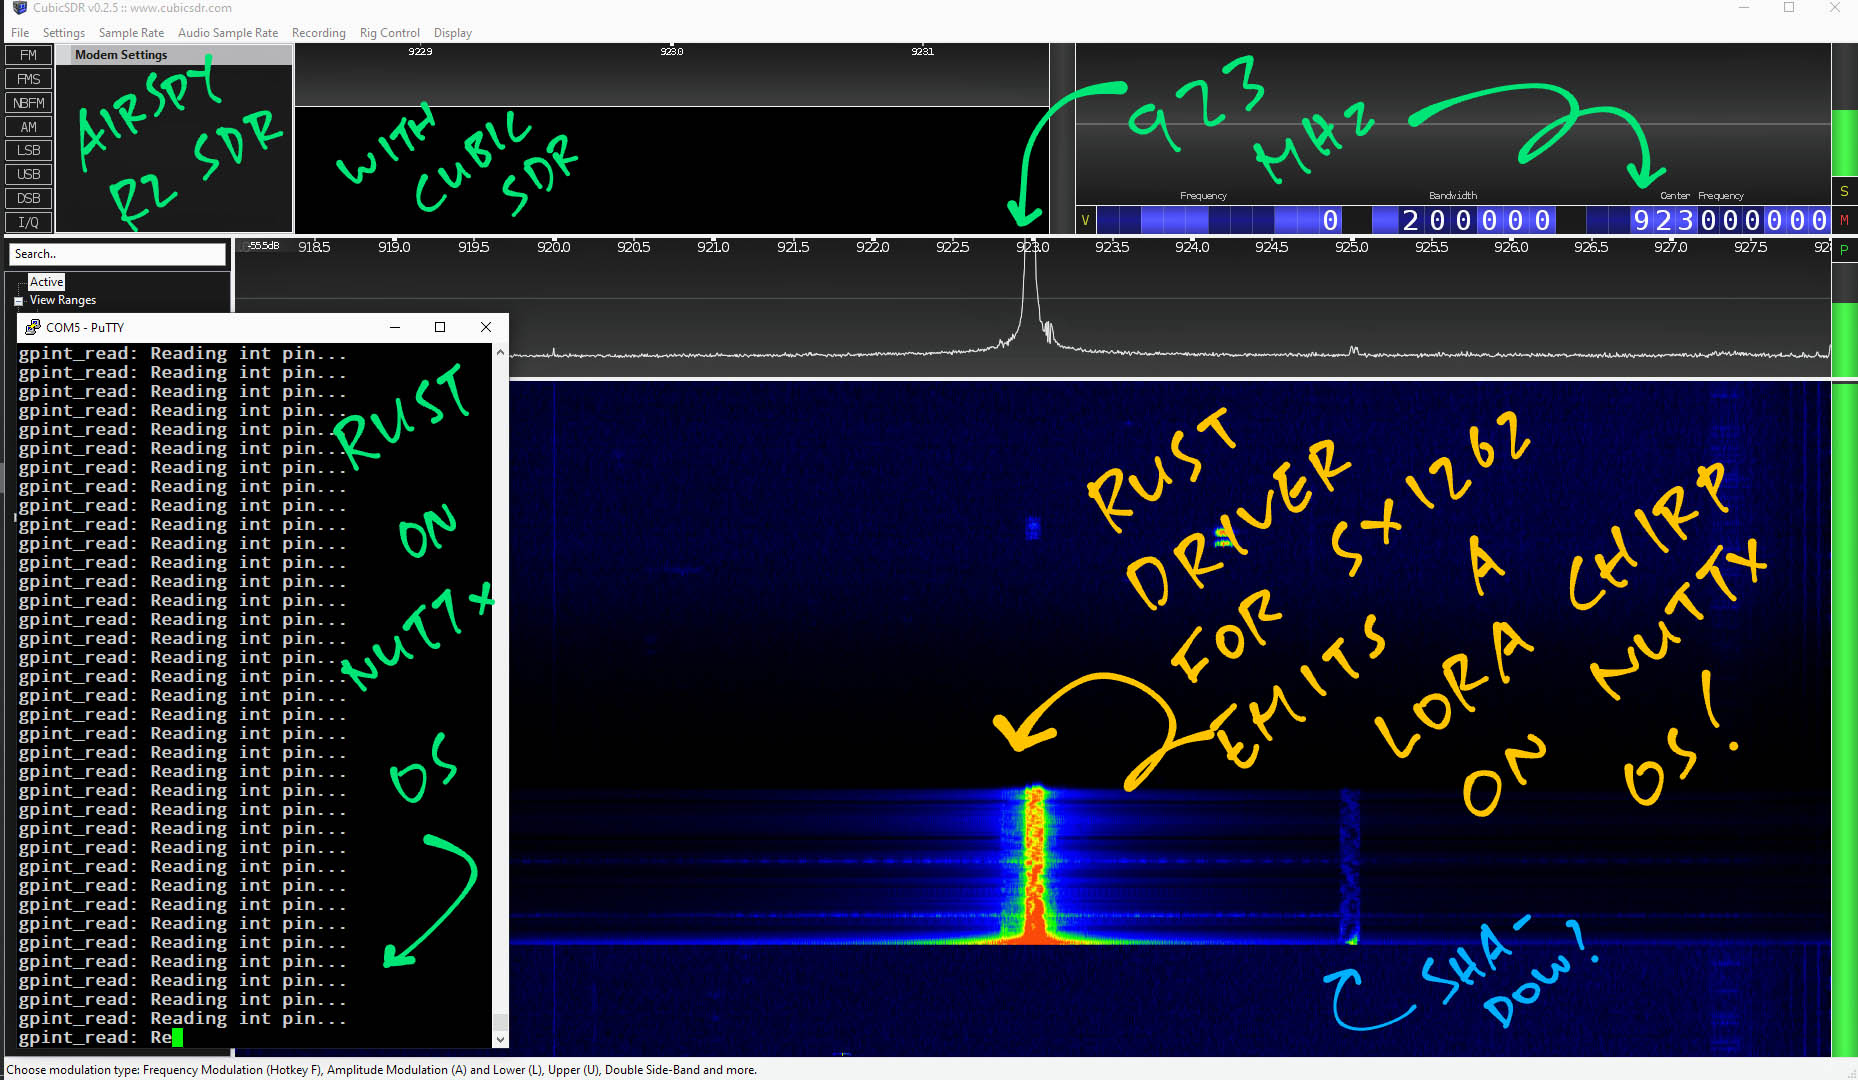 LoRa Chirp recorded by Cubic SDR connected to Airspy R2 SDR